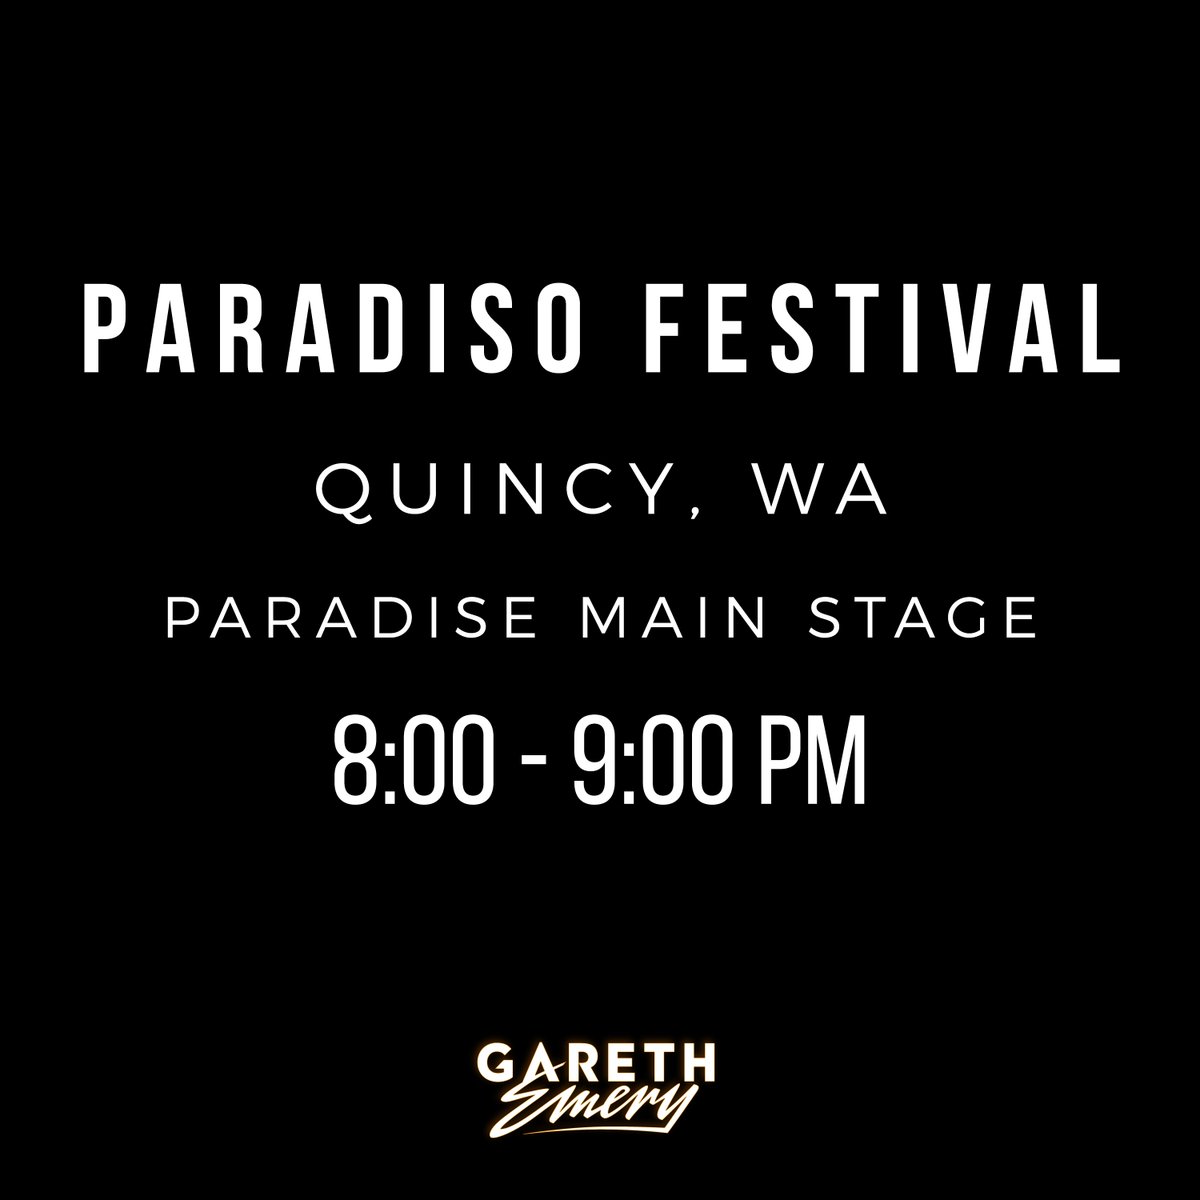 #Paradiso2017 today! 🎡 @USCevents   — Team GE https://t.co/O3DwOLhrHV